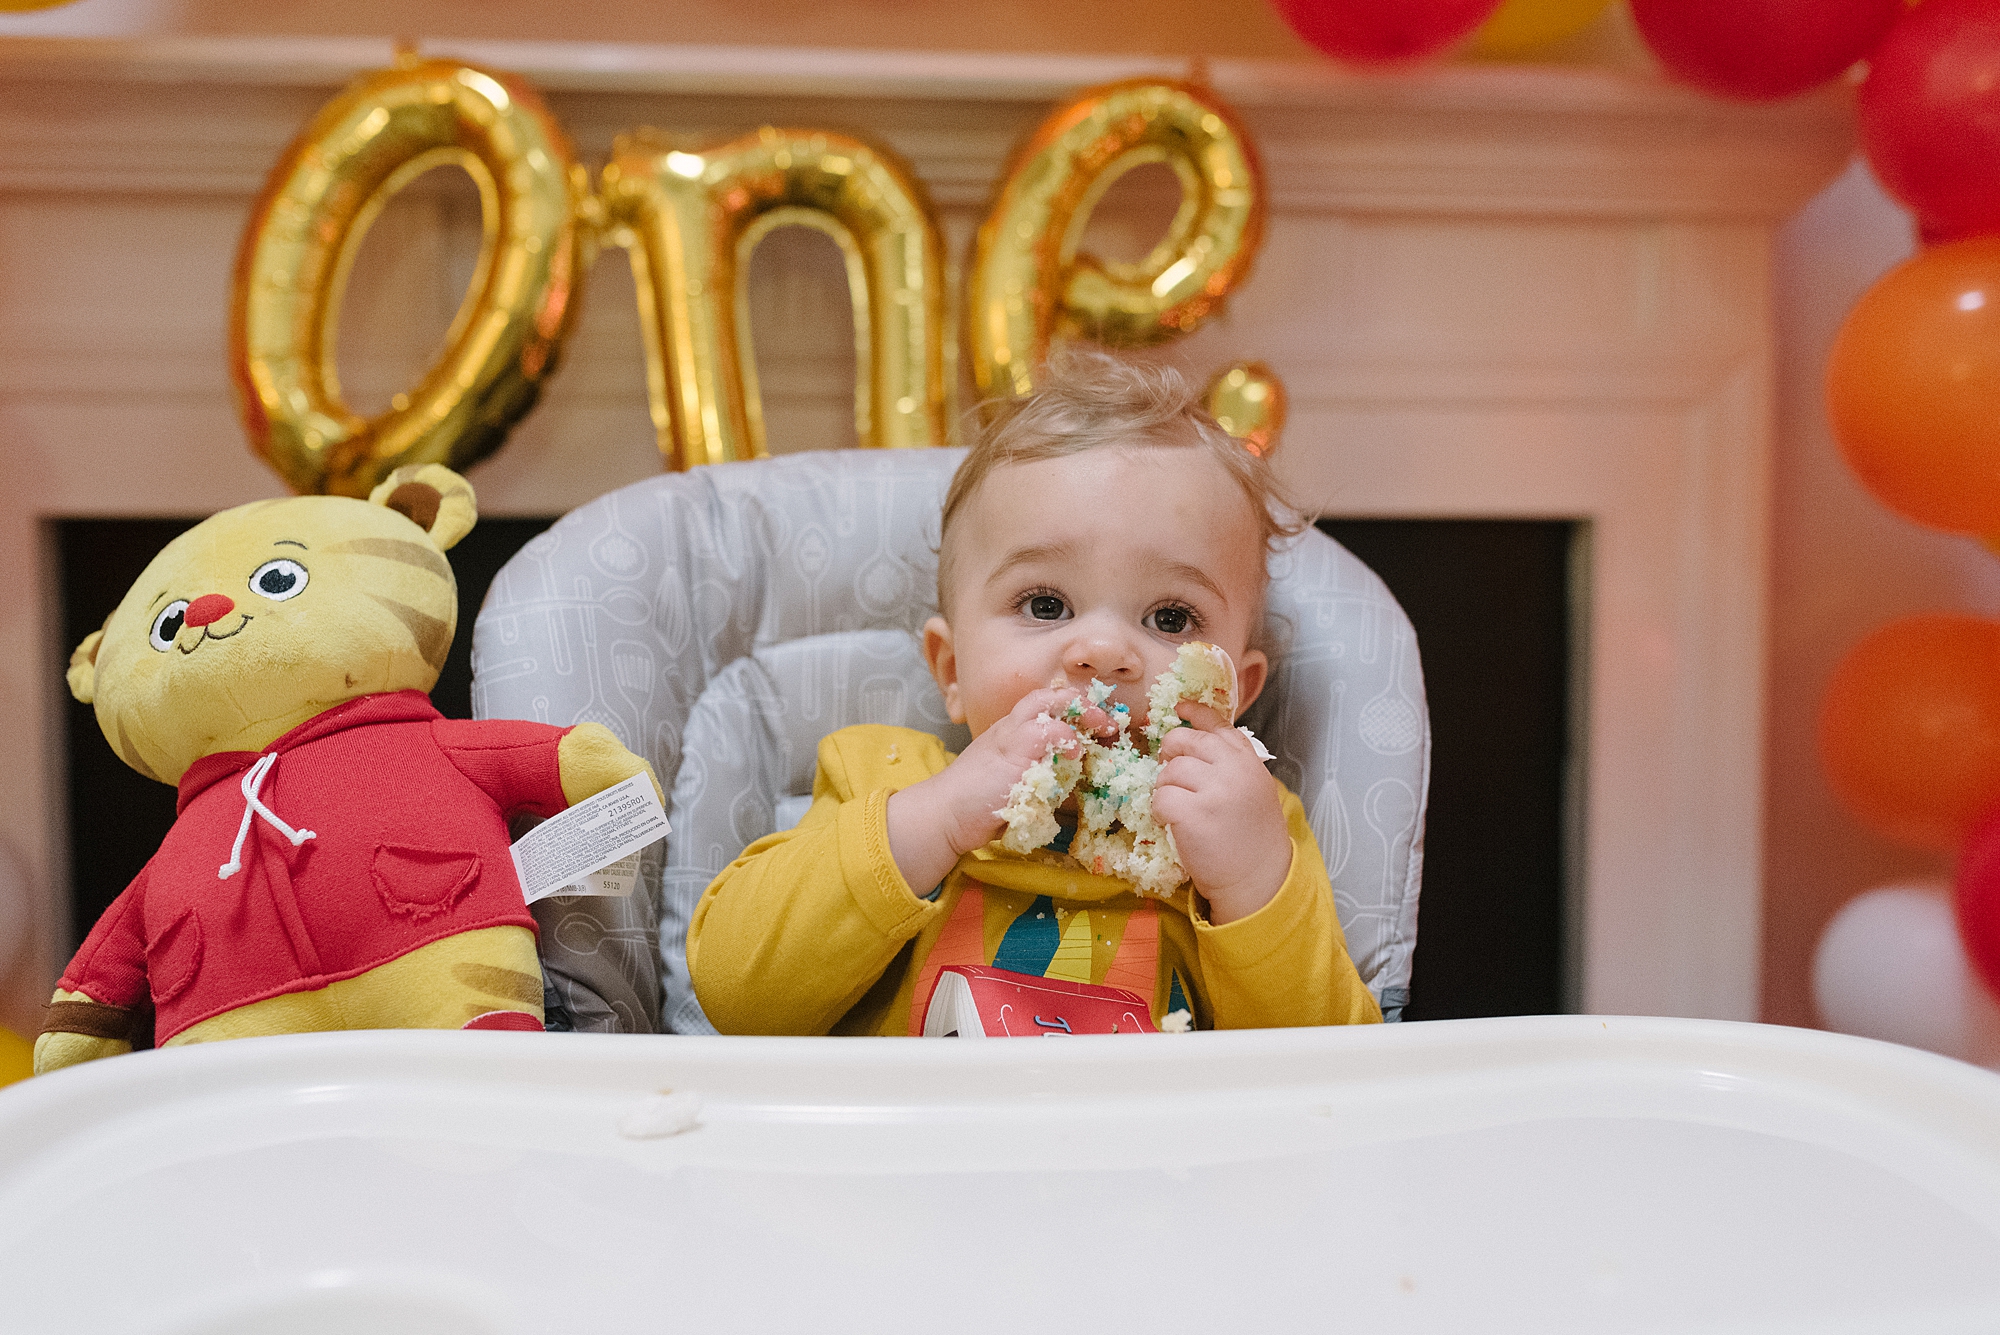 a one year old boy eating a cupcake at his daniel tiger themed birthday party